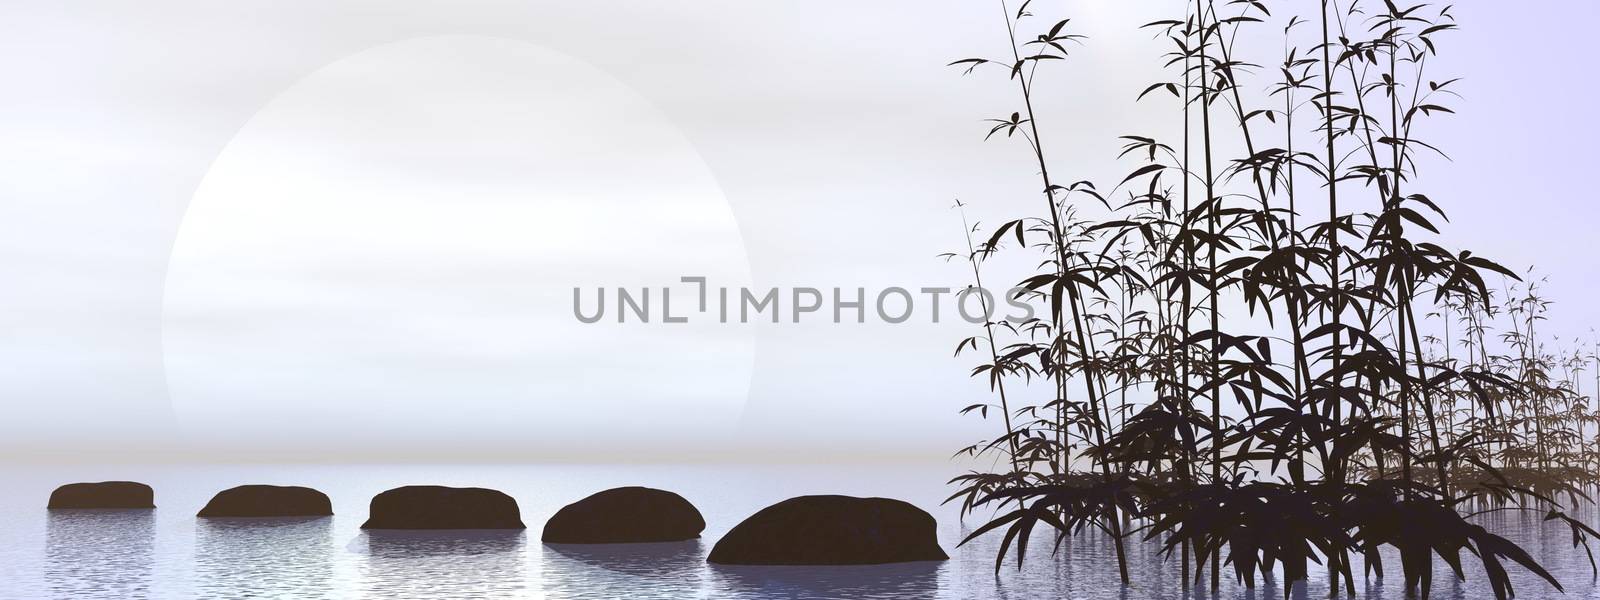 Bamboos next to stones leading towards the sun in black and white background